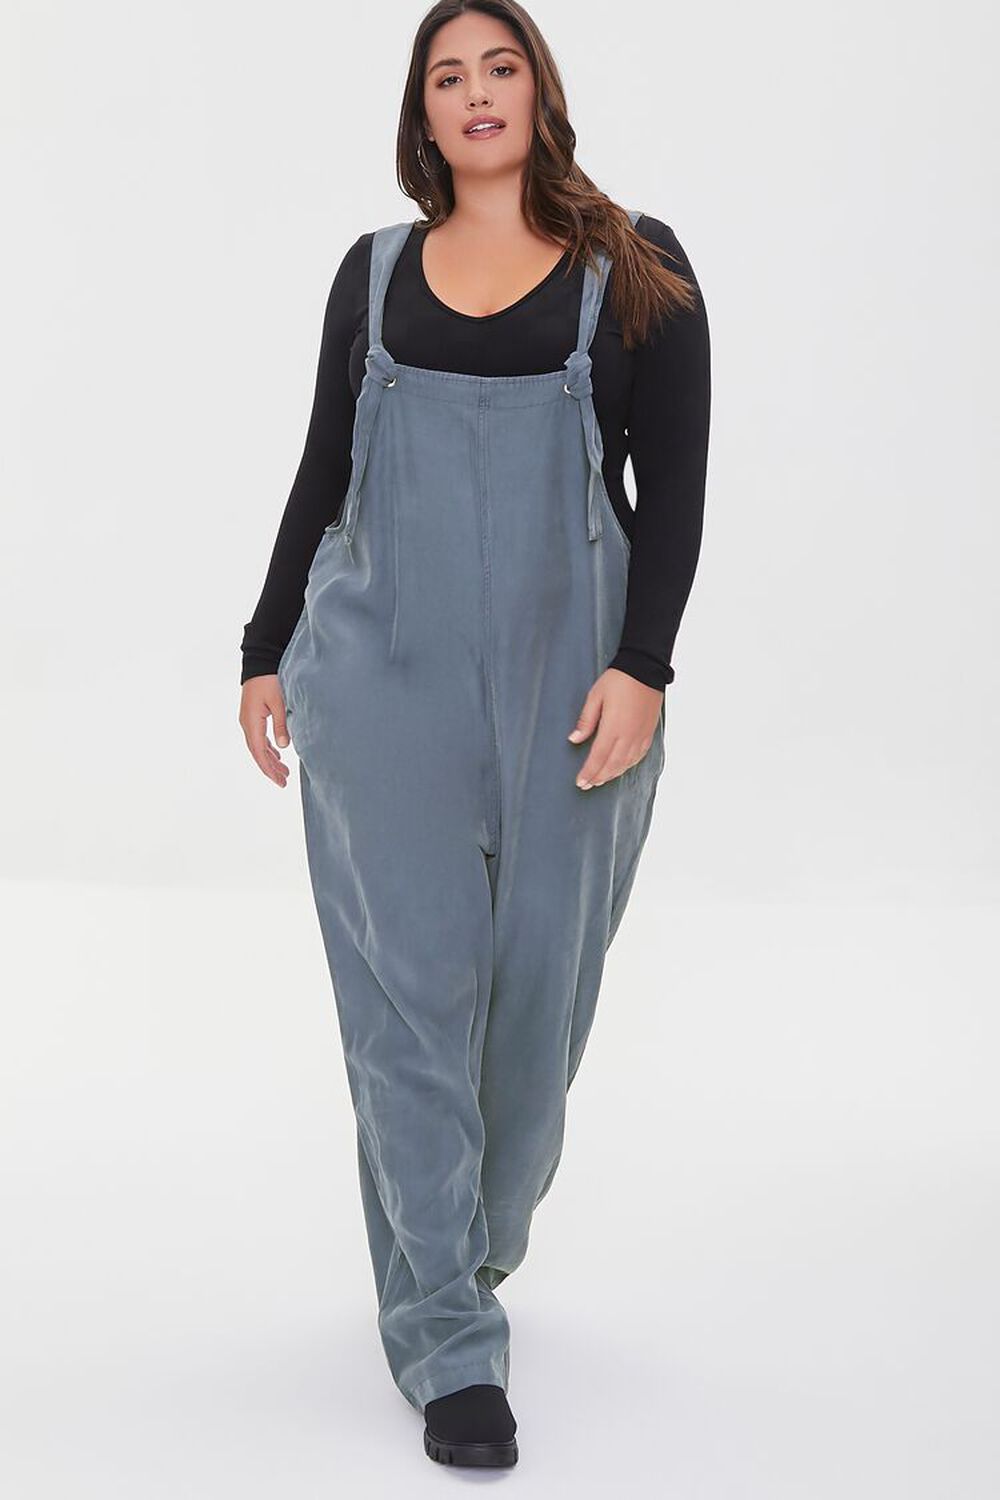 STEEPLE GREY Plus Size Twill Overalls, image 1